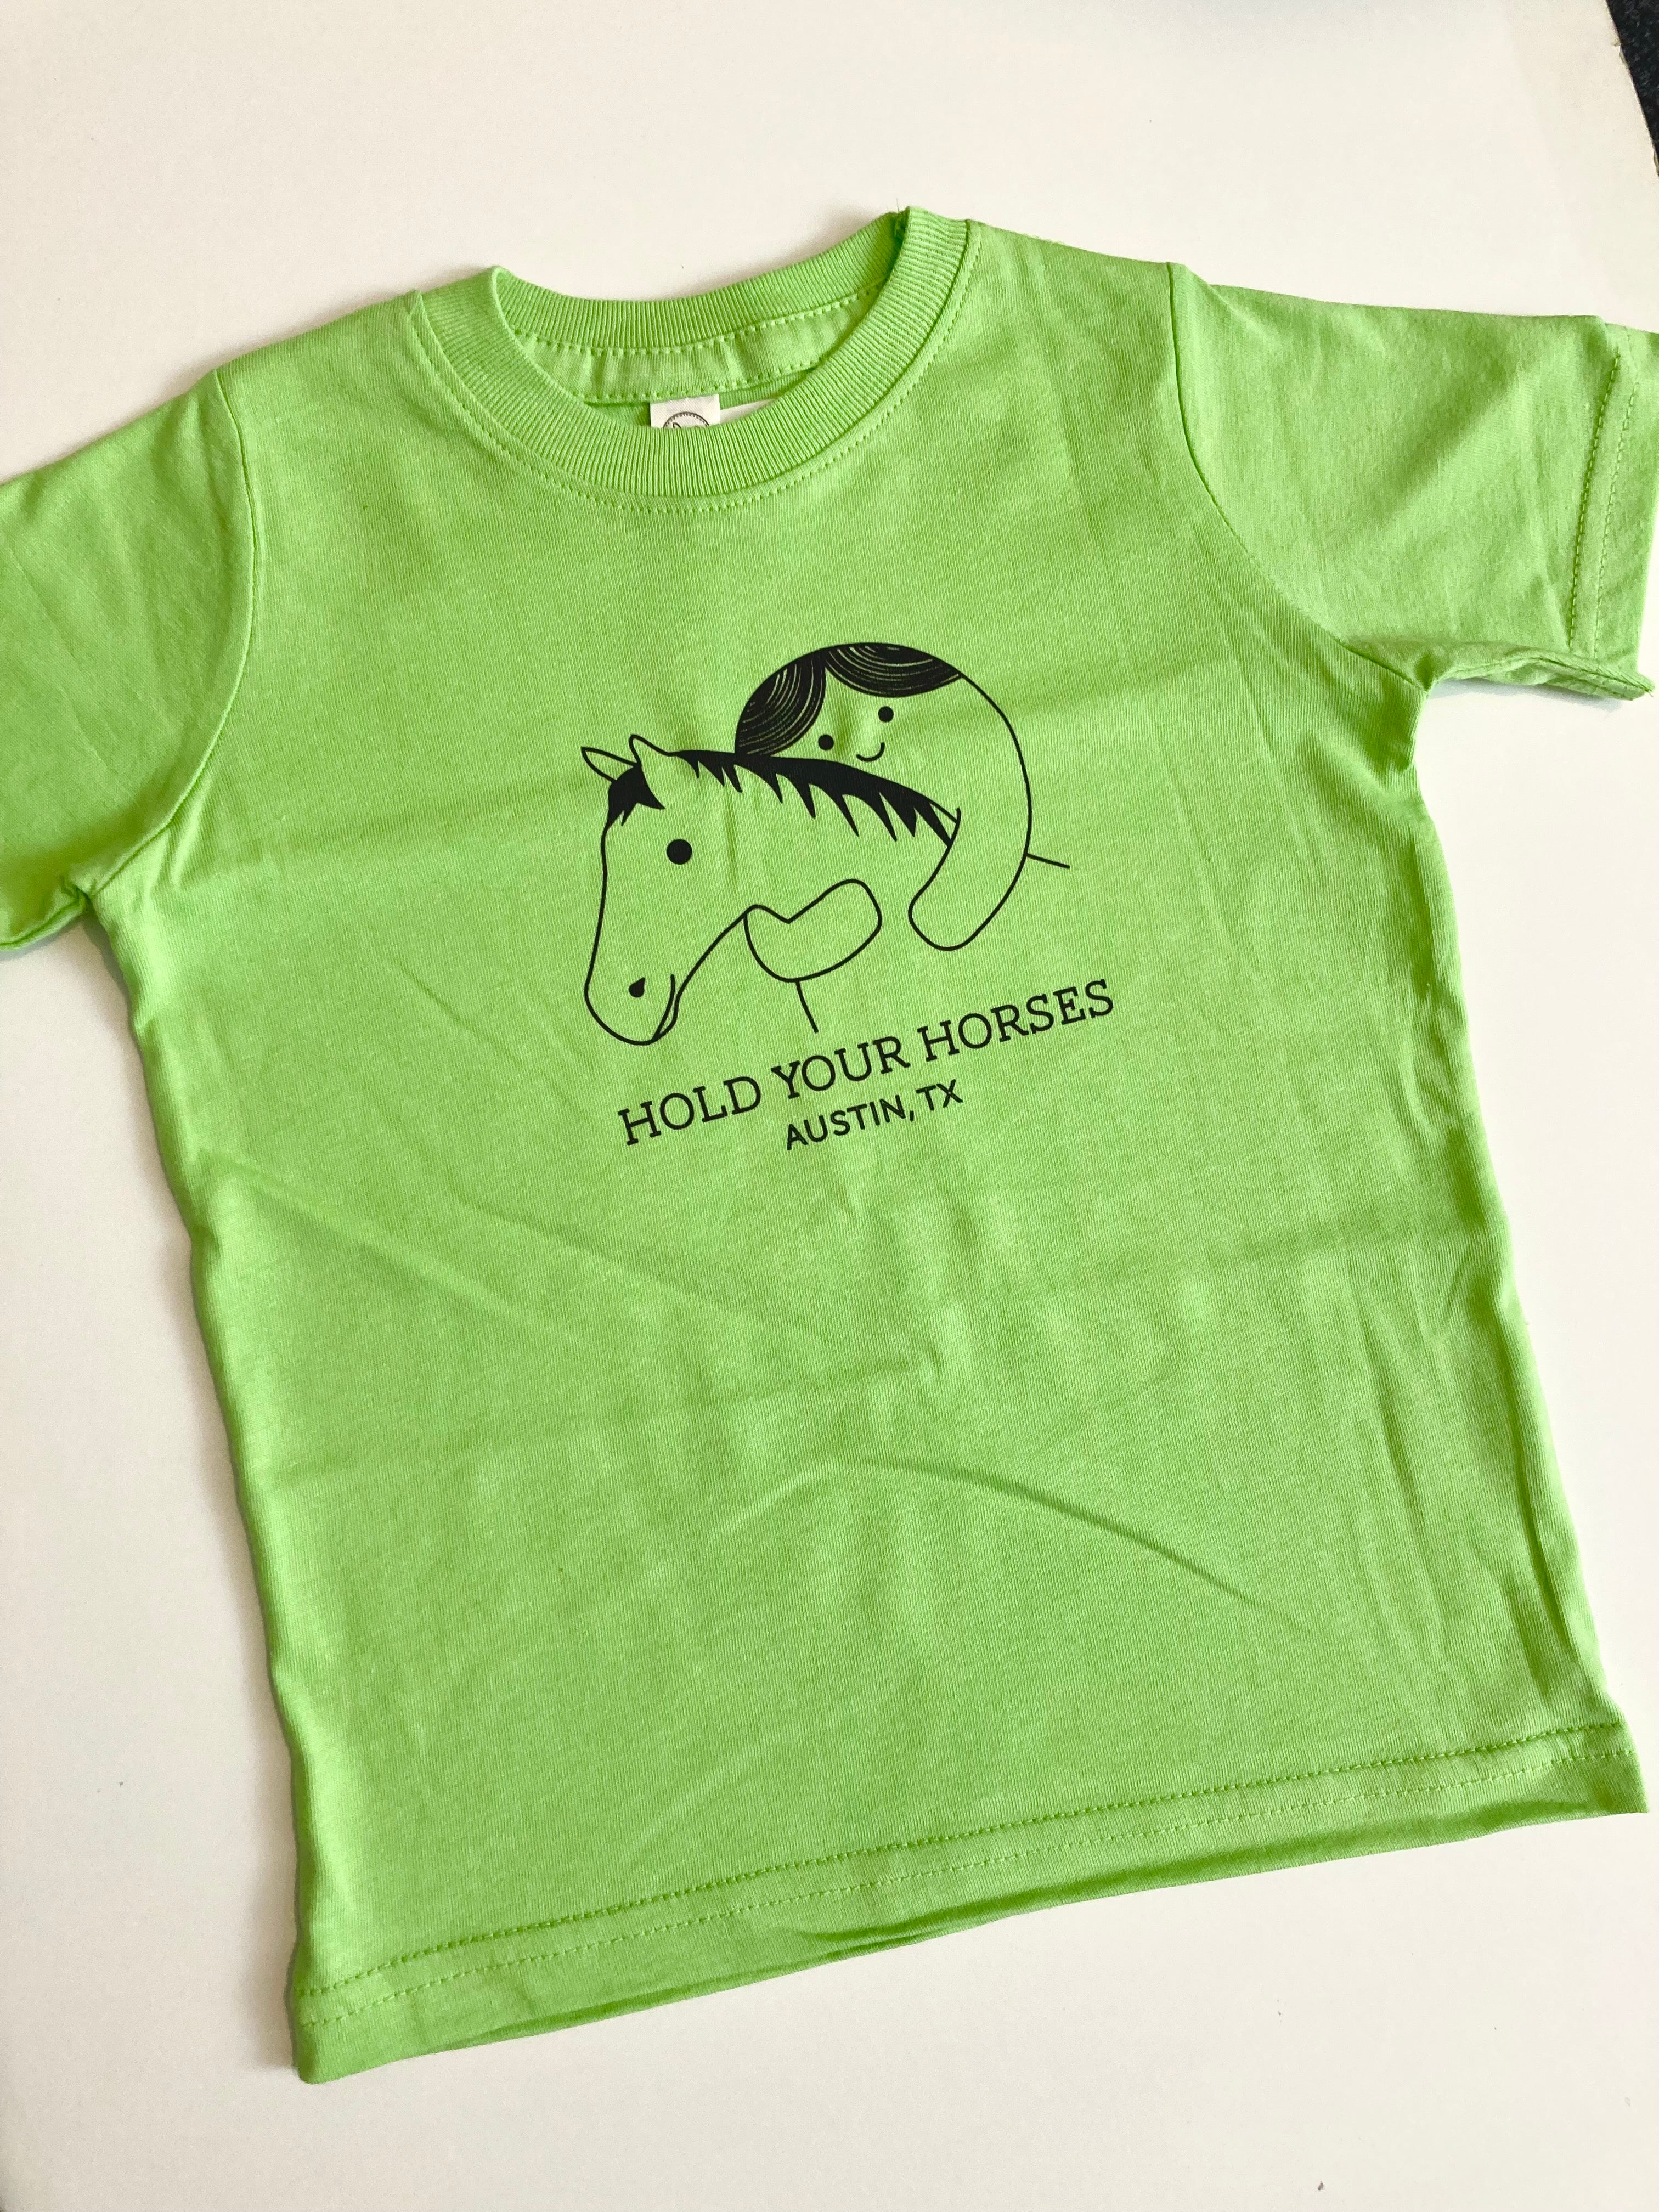 Hold Your Horses - Kids' Tee